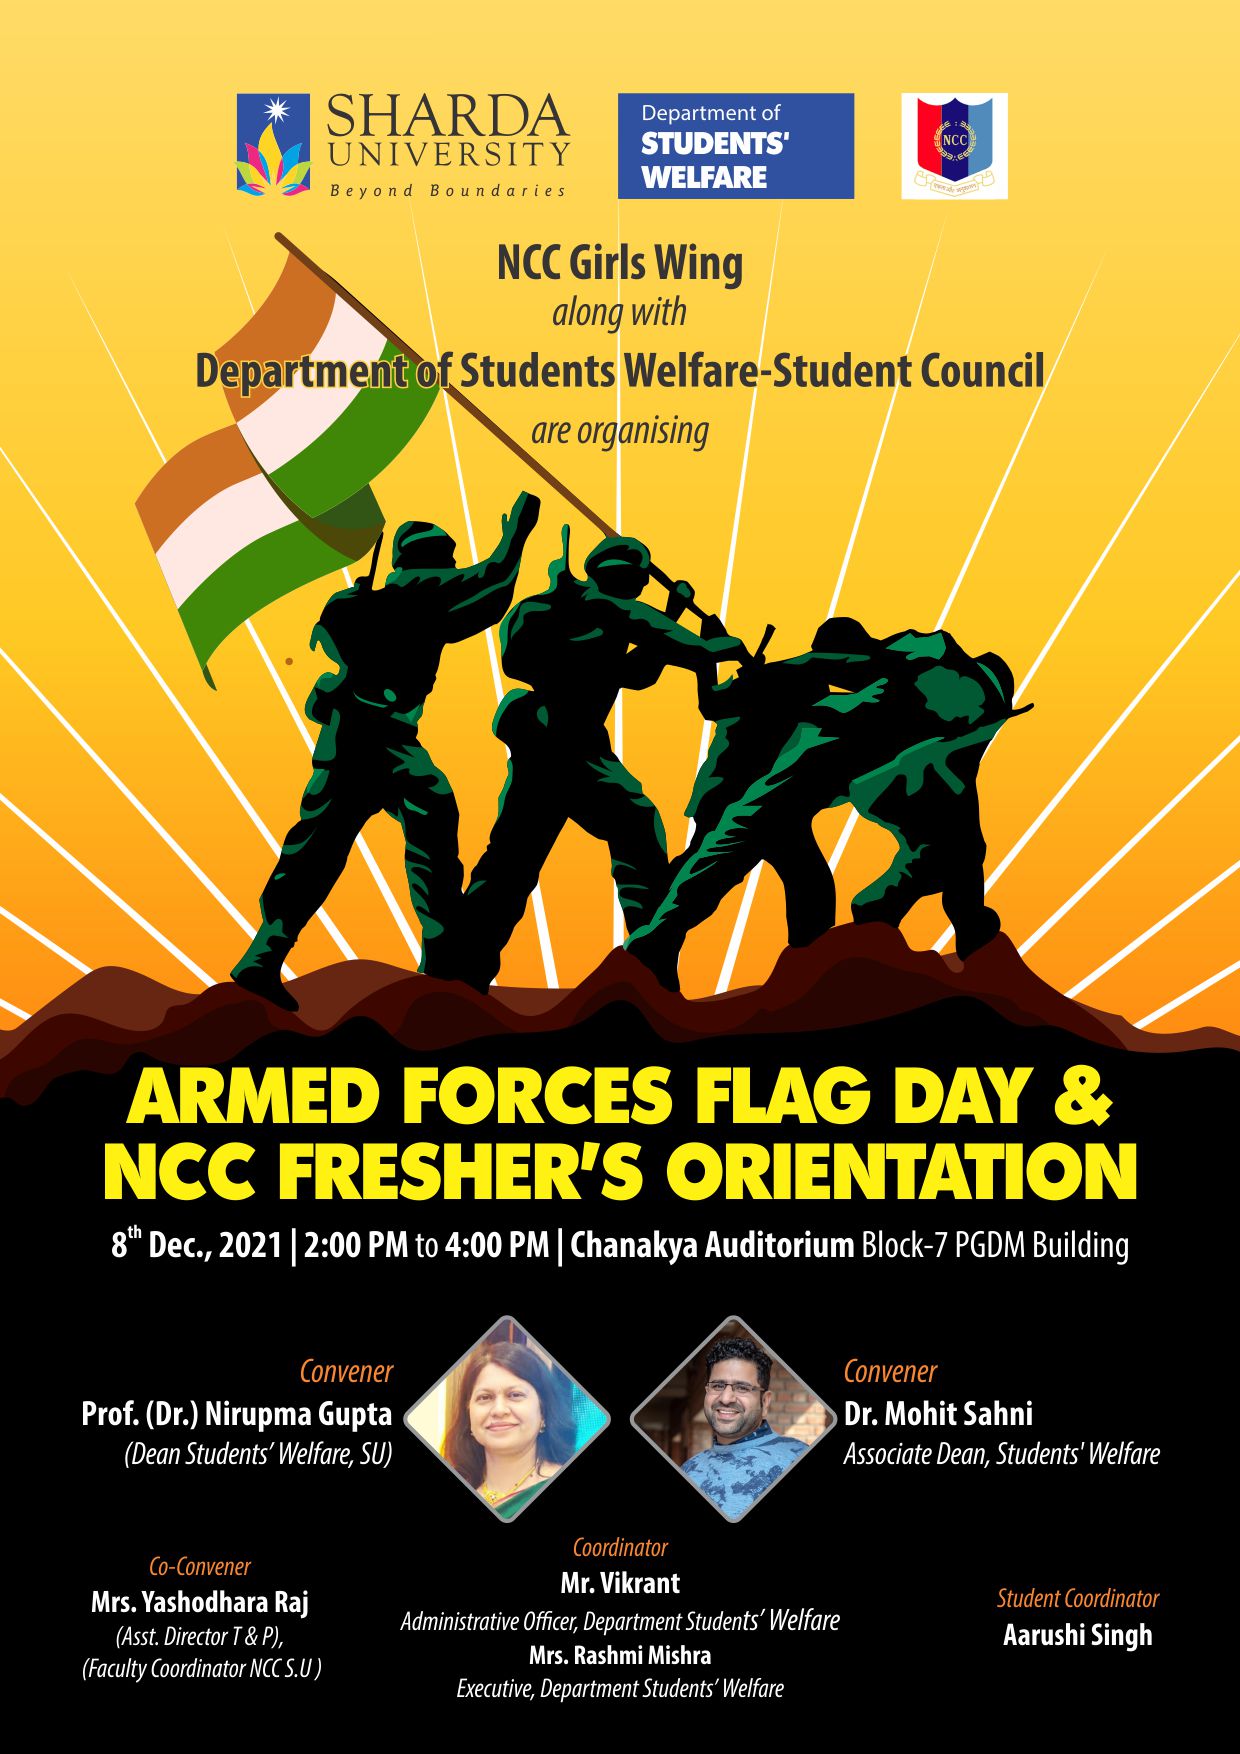 Armed Forces Flag Day & NCC Orientation